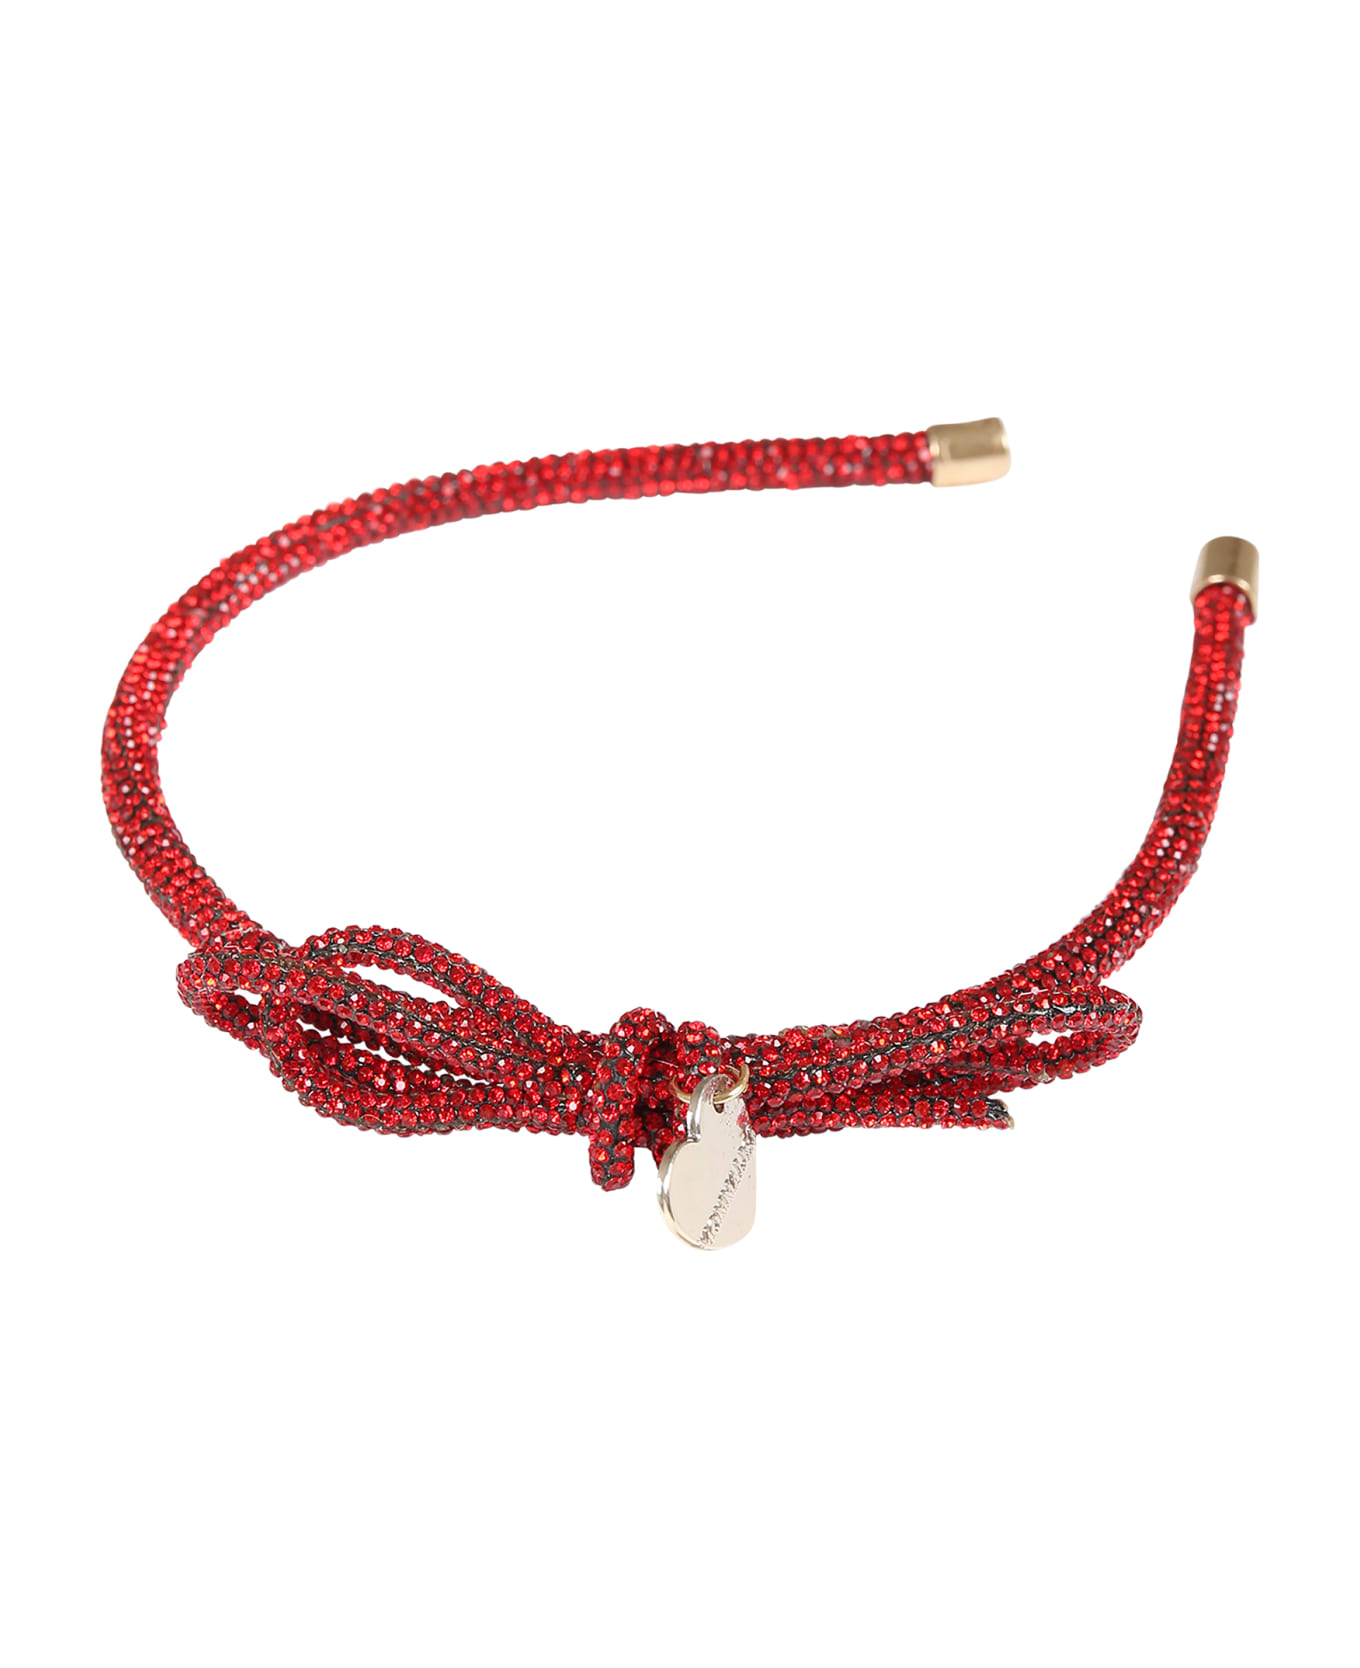 Monnalisa Red Headband For Girl With Bow - Red